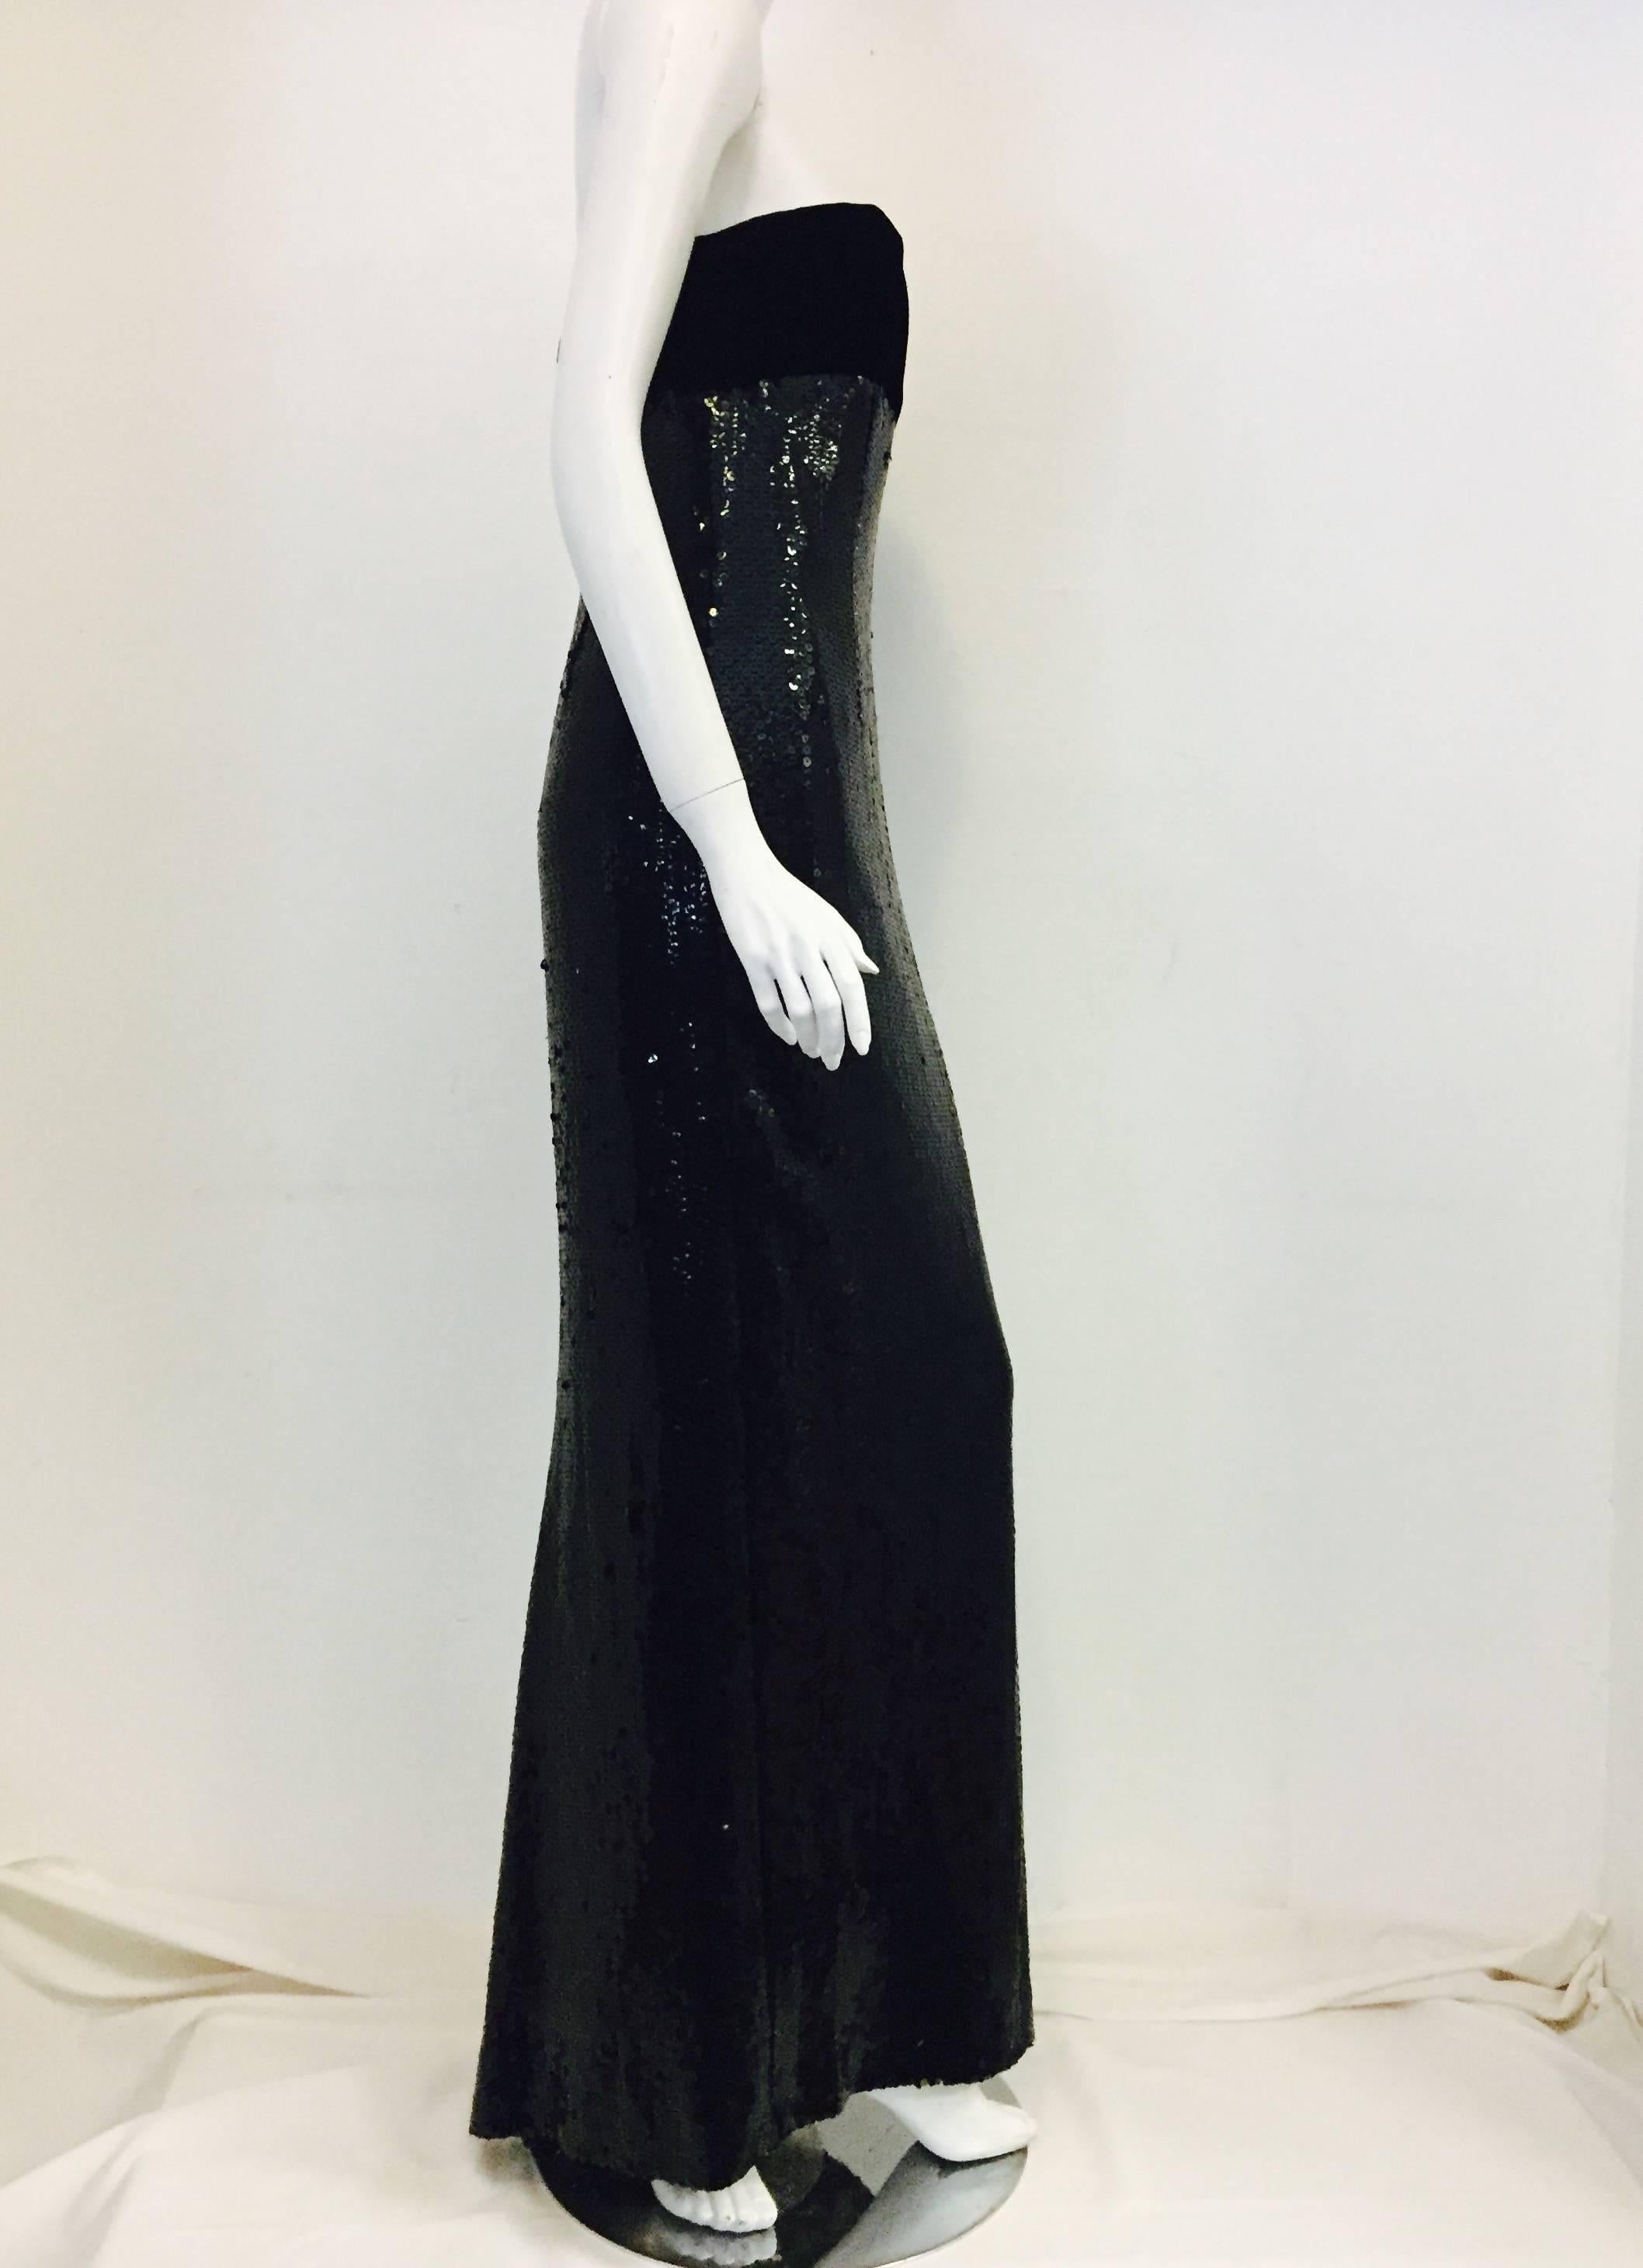 Brilliant Bill Blass vintage 80's gown with Black Velvet bust area and complemented with fish scale sequins down to the floor. Fitted  gown fully lined and in excellent condition. A gown 